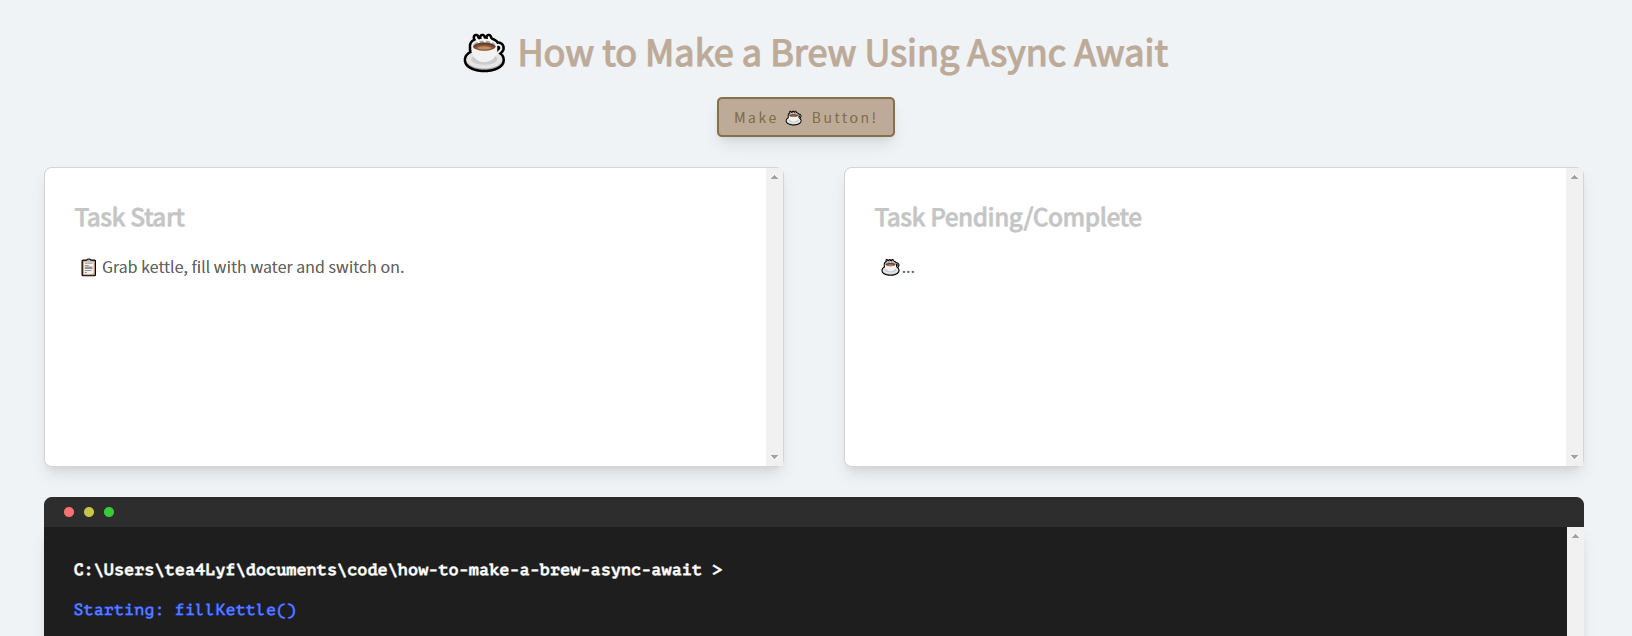 Image of Making a Brew Using Async Await website